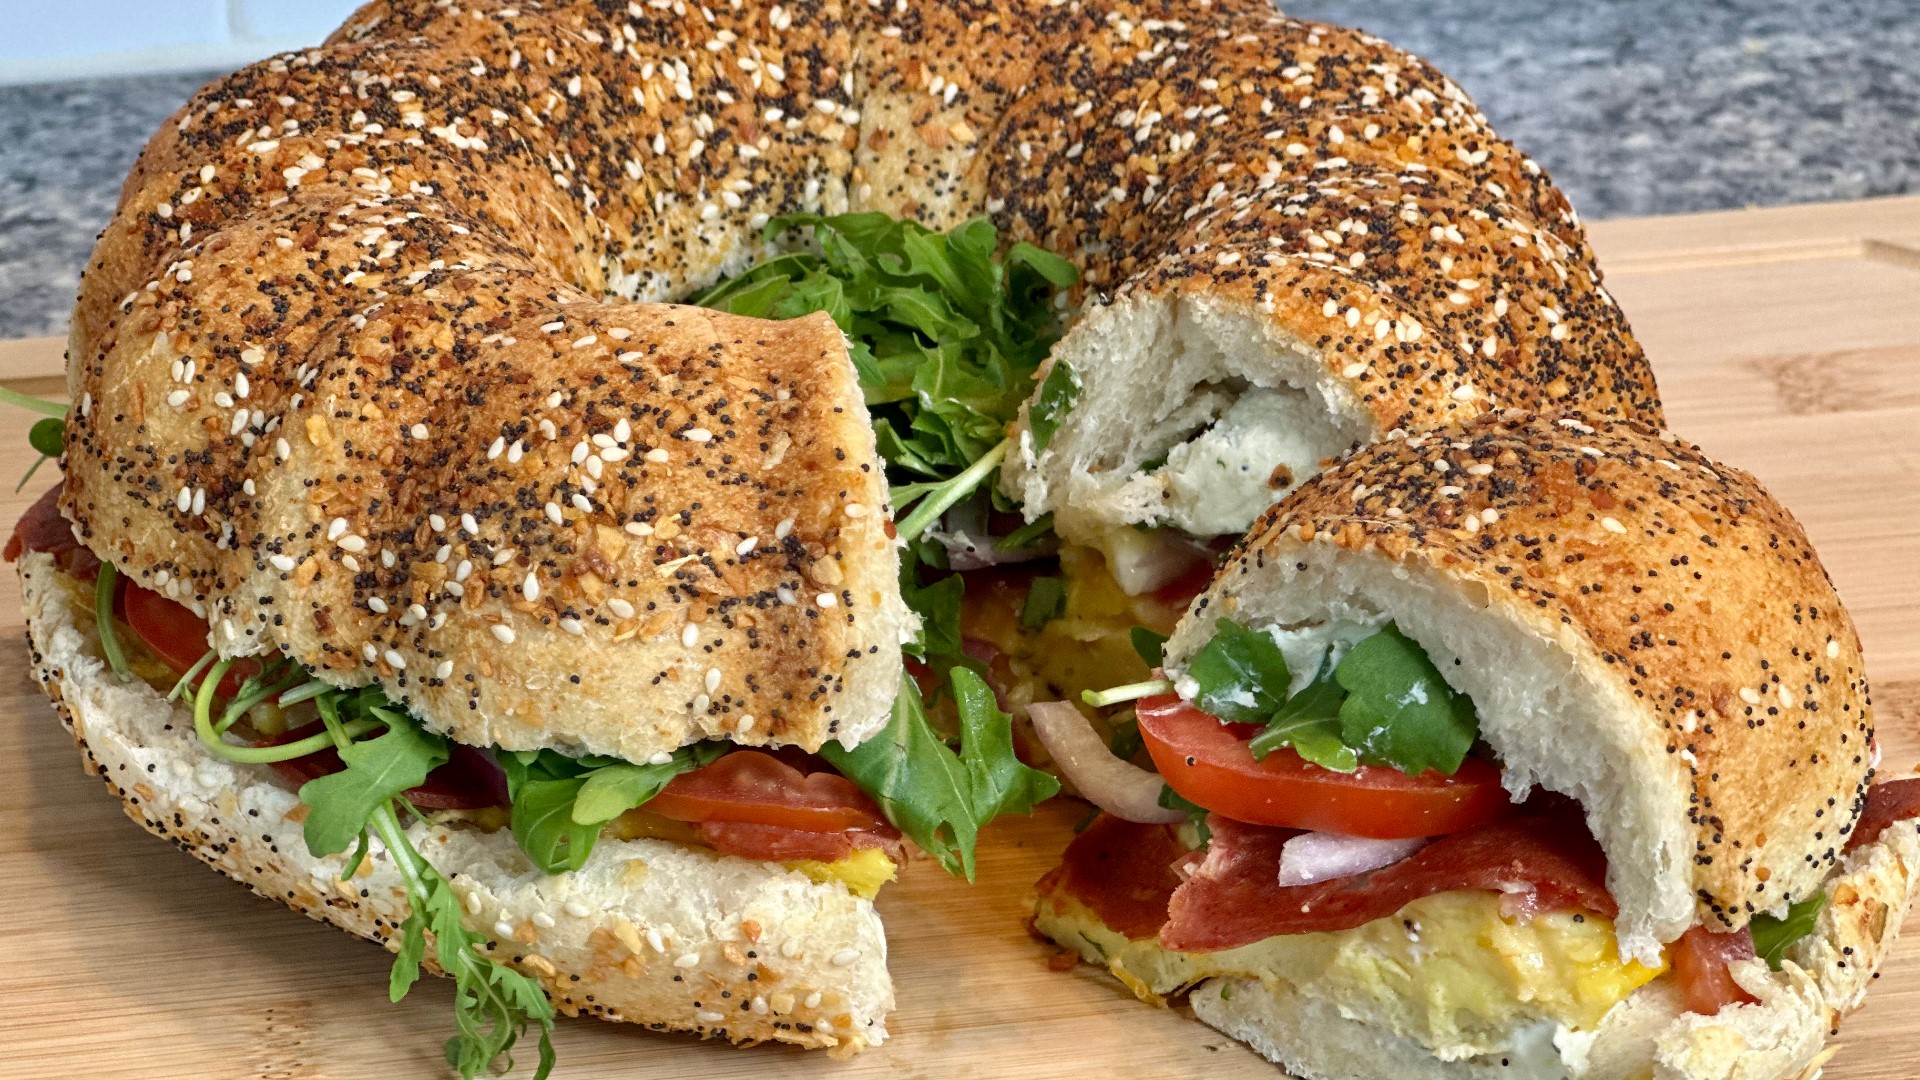 Happy National Have a Bagel Day! What better way to celebrate than to make your very own bagel sandwich? Check out how in the latest Brittany's Bites!